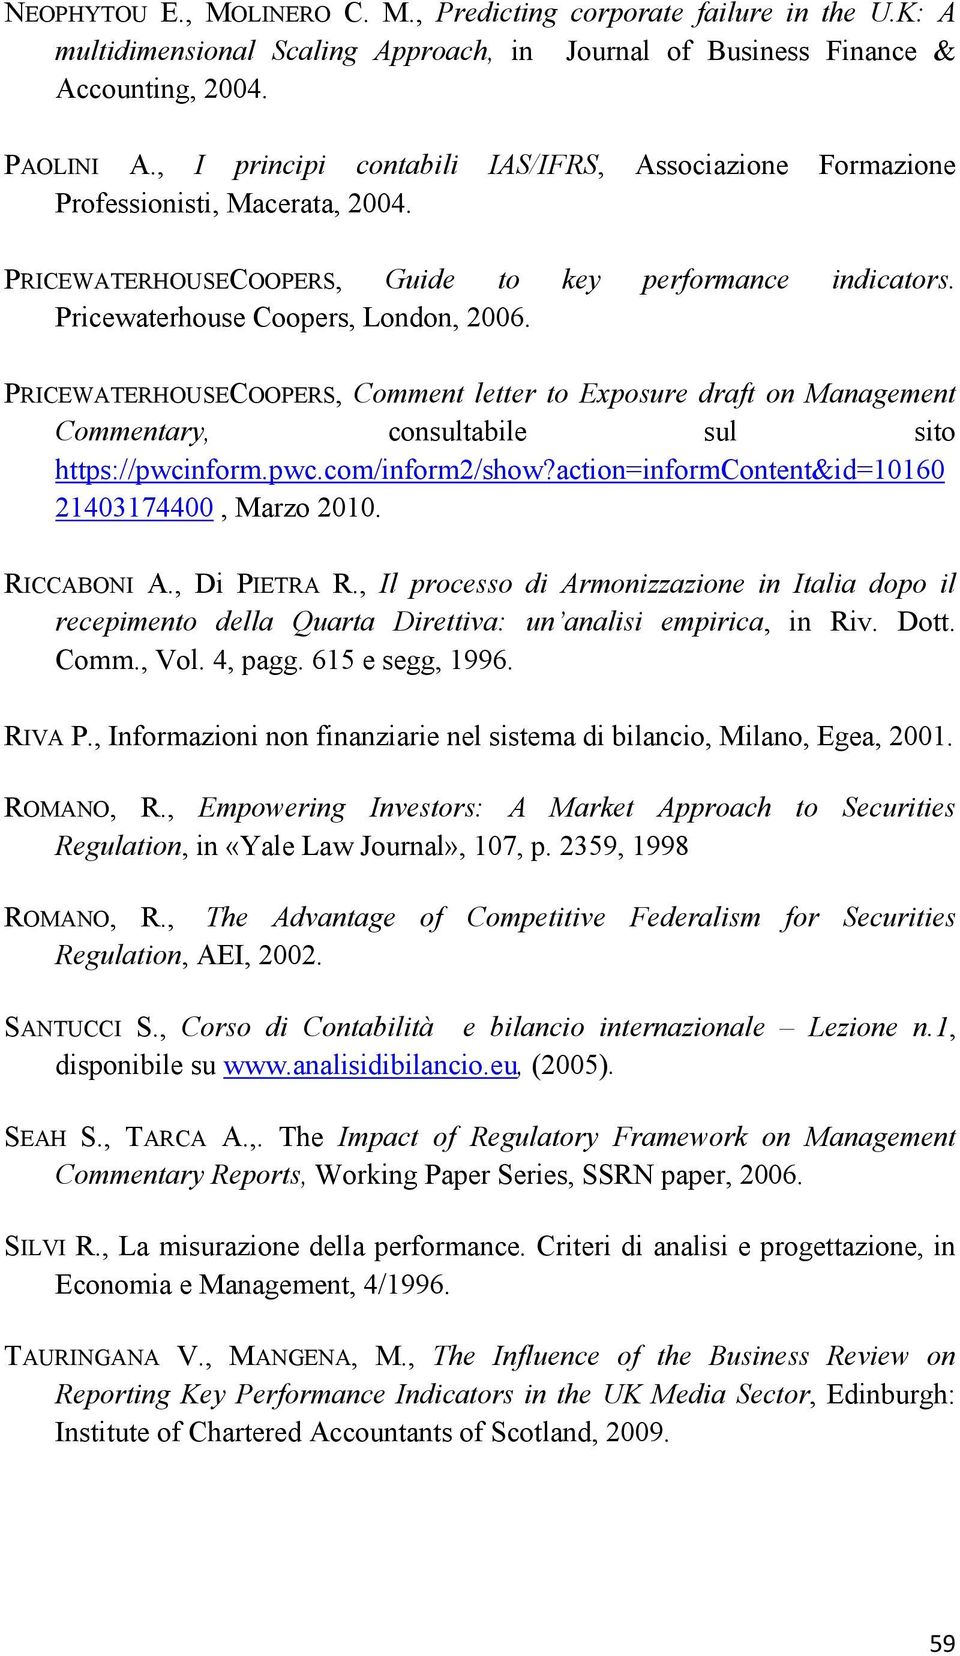 PRICEWATERHOUSECOOPERS, Comment letter to Exposure draft on Management Commentary, consultabile sul sito https://pwcinform.pwc.com/inform2/show?action=informcontent&id=10160 21403174400, Marzo 2010.